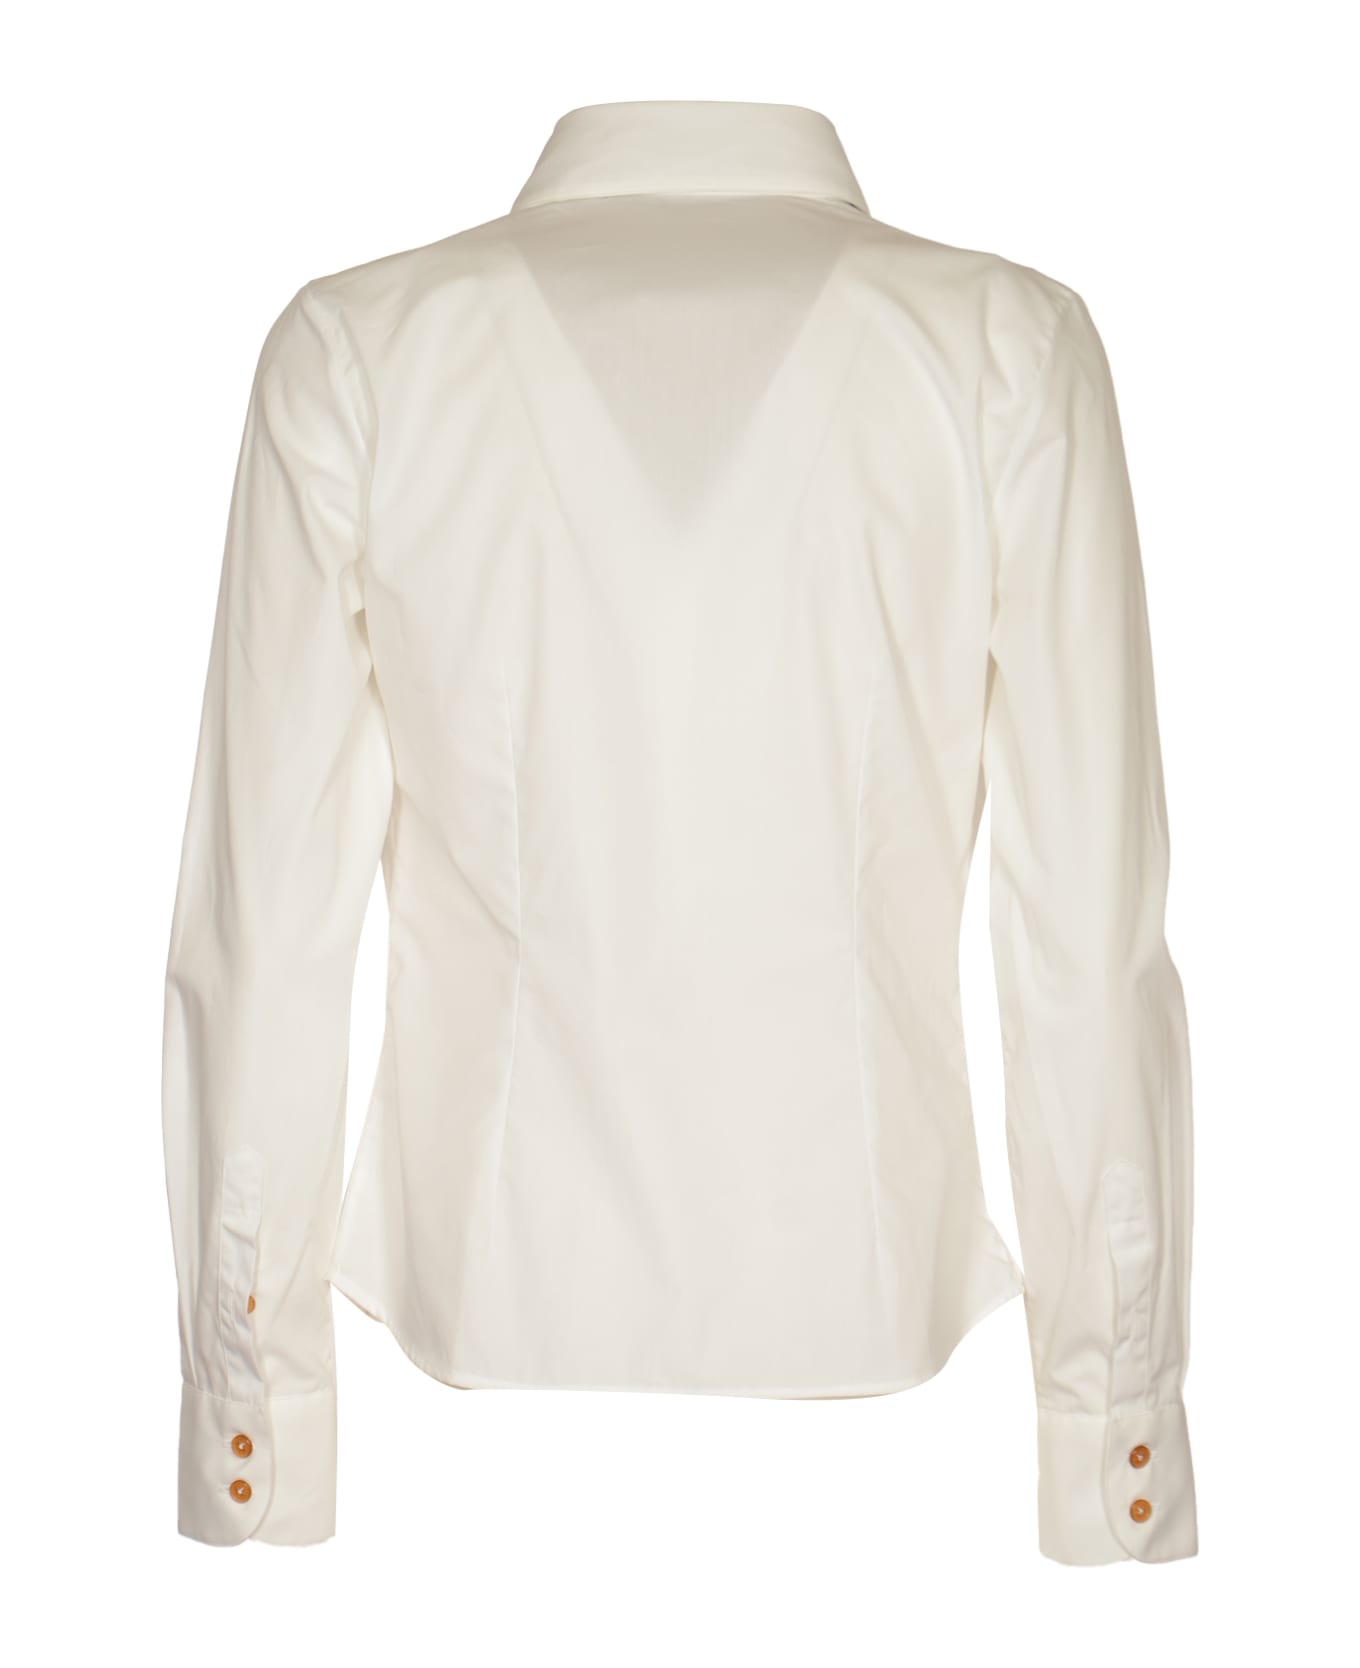 Vivienne Westwood Toulouse Shirt - White